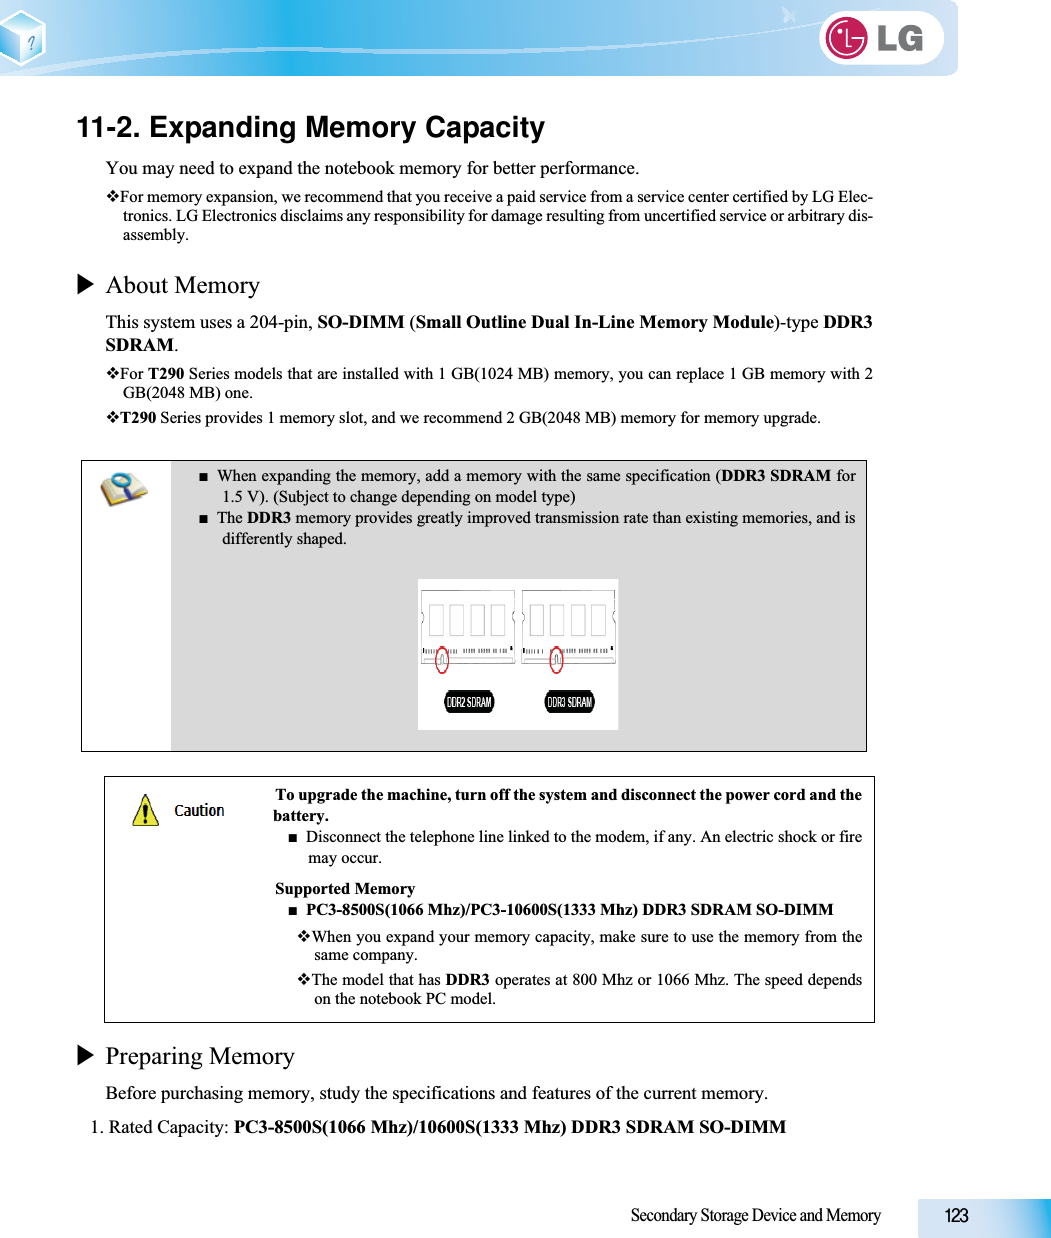 Secondary Storage Device and Memory11-2. Expanding Memory CapacityYou may need to expand the notebook memory for better performance.For memory expansion, we recommend that you receive a paid service from a service center certified by LG Elec-tronics. LG Electronics disclaims any responsibility for damage resulting from uncertified service or arbitrary dis-assembly.XAbout MemoryThis system uses a 204-pin, SO-DIMM (Small Outline Dual In-Line Memory Module)-type DDR3SDRAM.For T290 Series models that are installed with 1 GB(1024 MB) memory, you can replace 1 GB memory with 2GB(2048 MB) one.T290 Series provides 1 memory slot, and we recommend 2 GB(2048 MB) memory for memory upgrade.XPreparing MemoryBefore purchasing memory, study the specifications and features of the current memory.1. Rated Capacity: PC3-8500S(1066 Mhz)/10600S(1333 Mhz) DDR3 SDRAM SO-DIMMŶWhen expanding the memory, add a memory with the same specification (DDR3 SDRAM for1.5 V). (Subject to change depending on model type)ŶThe DDR3 memory provides greatly improved transmission rate than existing memories, and isdifferently shaped.To upgrade the machine, turn off the system and disconnect the power cord and thebattery.ŶDisconnect the telephone line linked to the modem, if any. An electric shock or firemay occur.Supported MemoryŶPC3-8500S(1066 Mhz)/PC3-10600S(1333 Mhz) DDR3 SDRAM SO-DIMMWhen you expand your memory capacity, make sure to use the memory from thesame company.The model that has DDR3 operates at 800 Mhz or 1066 Mhz. The speed dependson the notebook PC model.